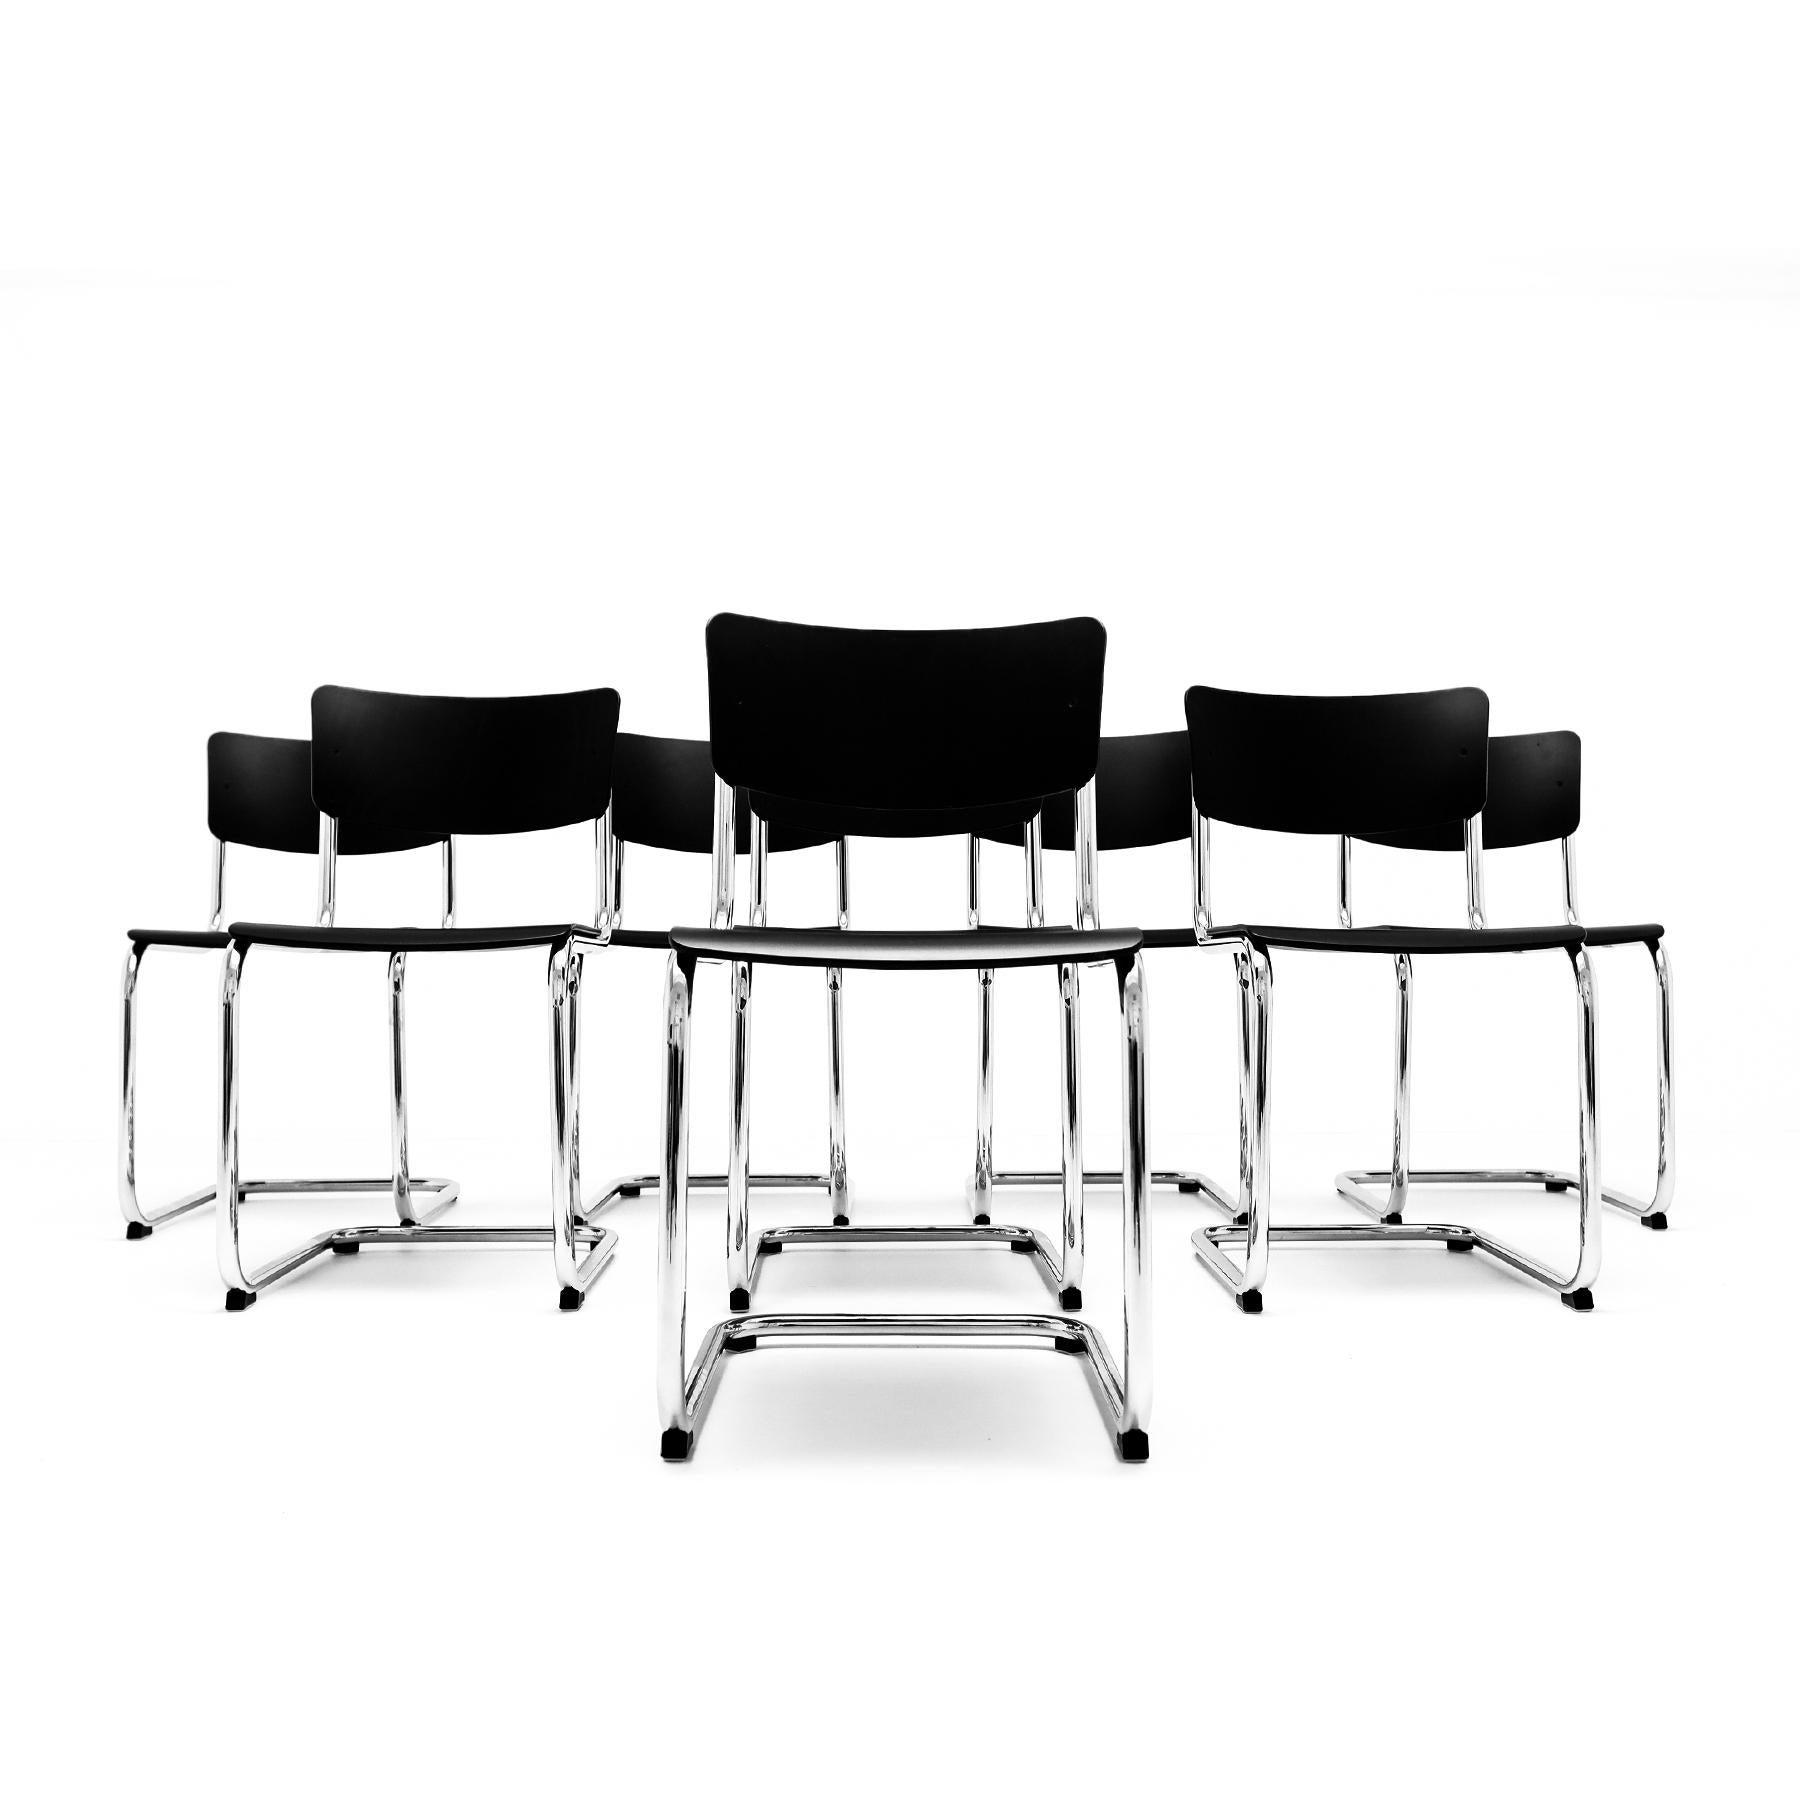 A set of 8 Mart Stam Bauhaus designed S 43 Cantilever chairs by Thonet with chrome frames and black stained beech back rest and seat. The price listed is for the 8 chairs as shown.  

The S43 chair was designed by Dutch architect Mart Stam in the